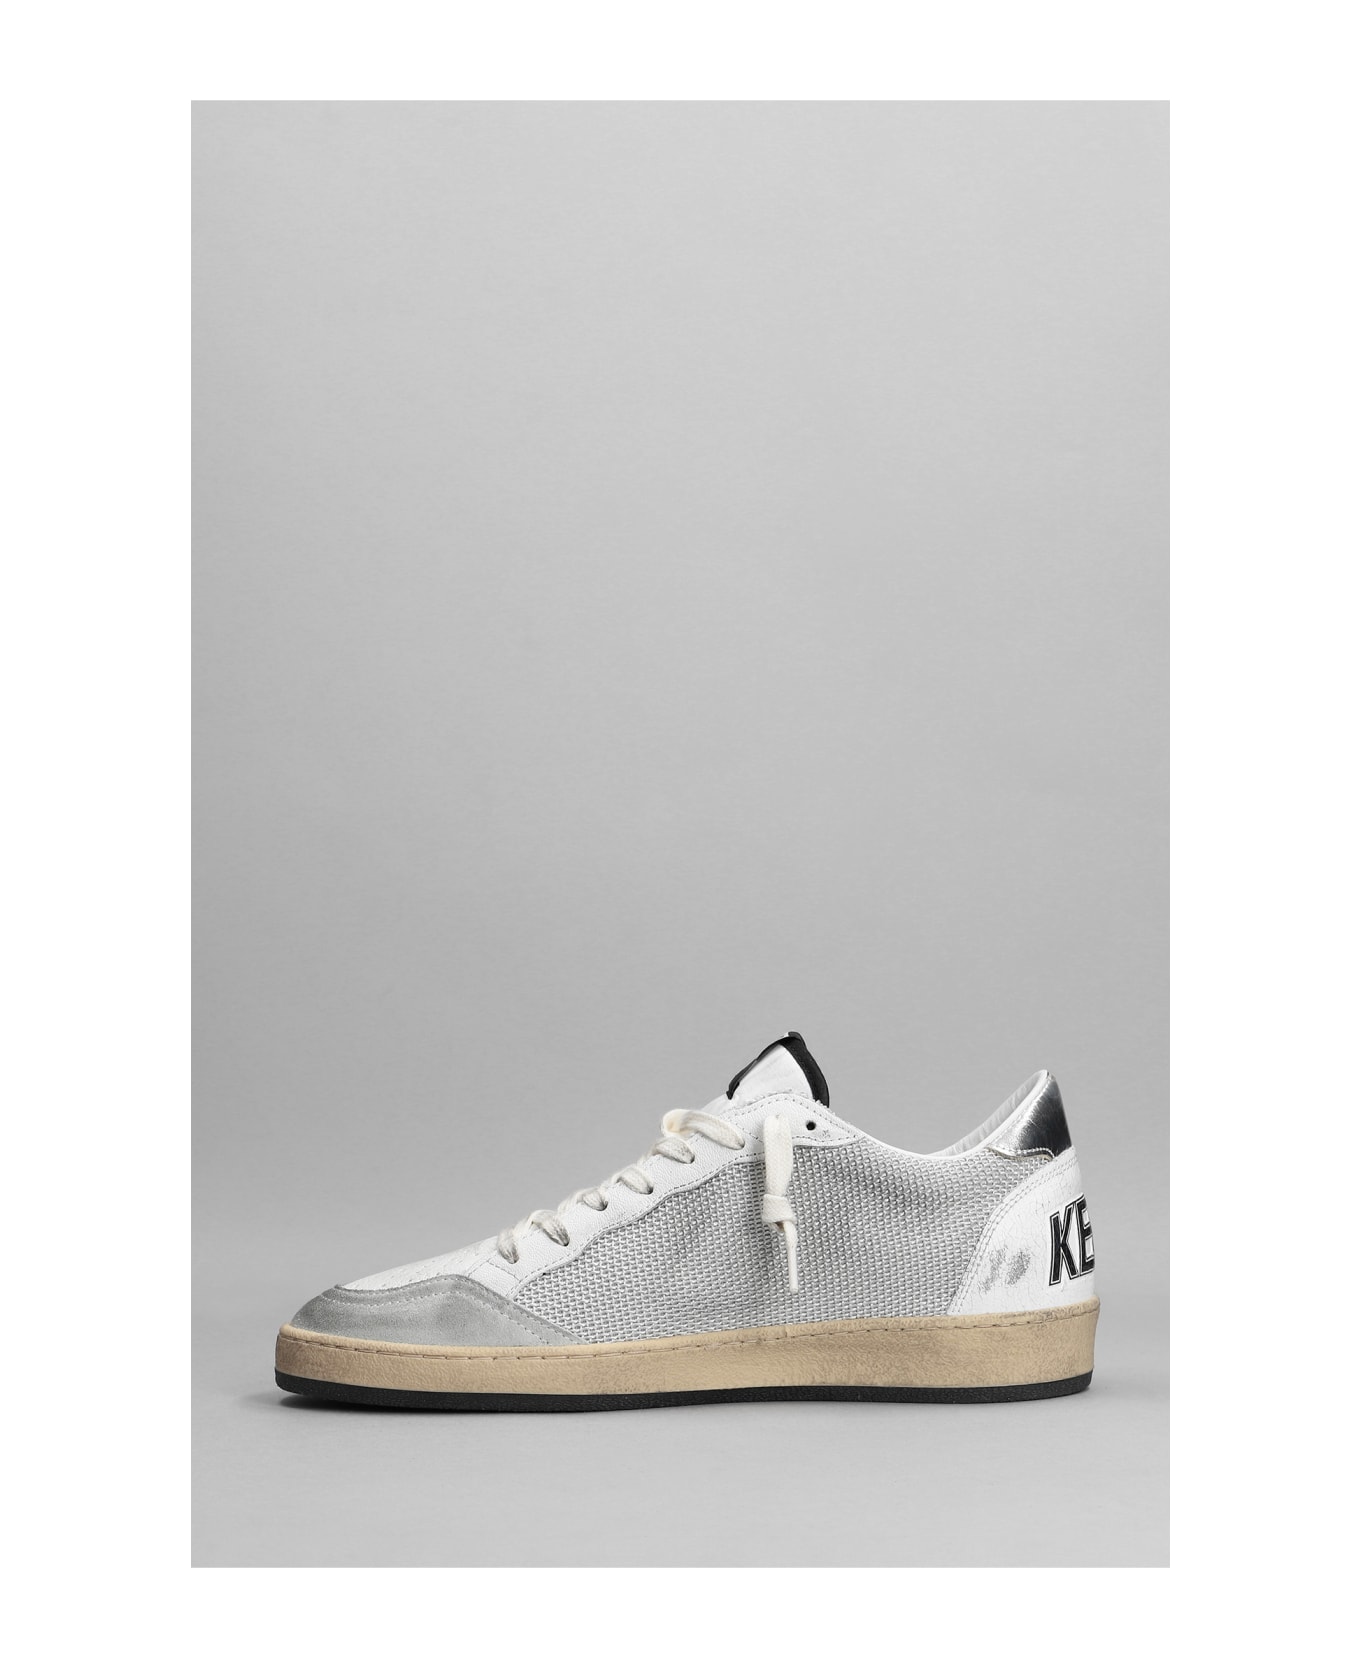 Golden Goose Ball Star Sneakers In White Leather And Fabric - Light silver/black/white/silve